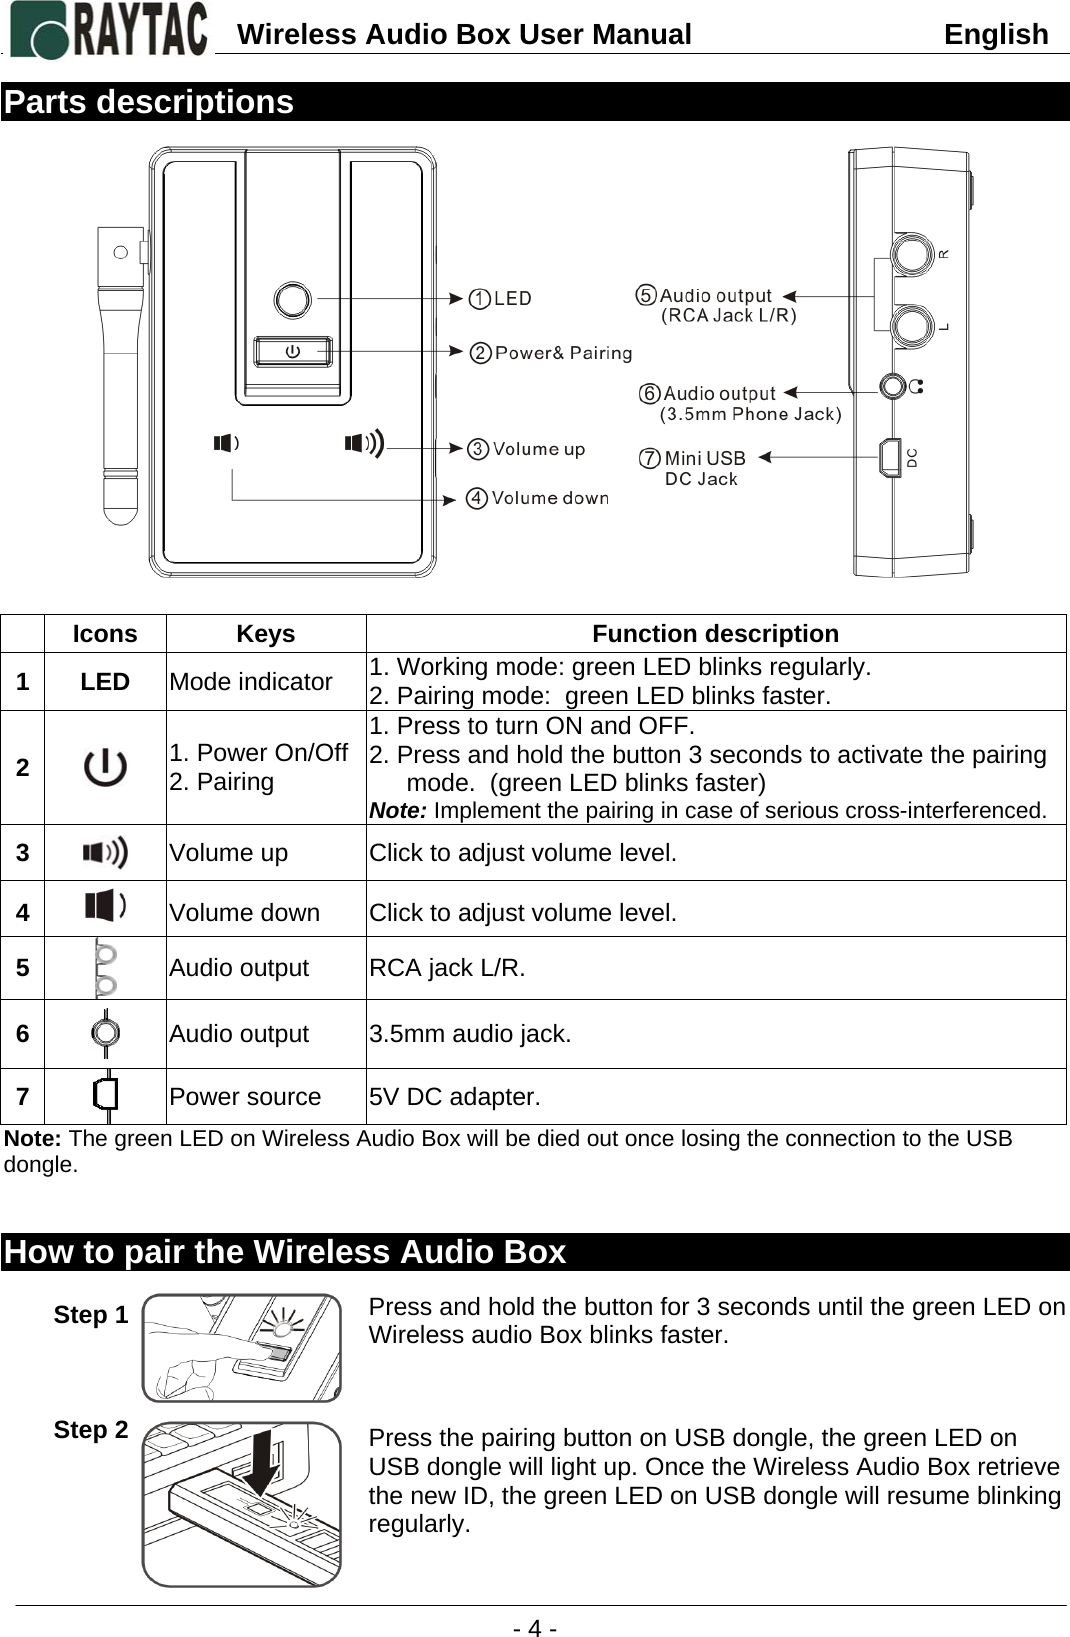 Wireless Audio Box User Manual                               English    - 4 -  Parts descriptions    Note: The green LED on Wireless Audio Box will be died out once losing the connection to the USB dongle.   How to pair the Wireless Audio Box  Step 1        Step 2         Icons  Keys  Function description 1 LED Mode indicator  1. Working mode: green LED blinks regularly. 2. Pairing mode:  green LED blinks faster. 2   1. Power On/Off   2. Pairing 1. Press to turn ON and OFF.                                2. Press and hold the button 3 seconds to activate the pairing mode.  (green LED blinks faster) Note: Implement the pairing in case of serious cross-interferenced.3   Volume up  Click to adjust volume level. 4   Volume down  Click to adjust volume level. 5   Audio output  RCA jack L/R. 6   Audio output  3.5mm audio jack. 7   Power source  5V DC adapter. Press and hold the button for 3 seconds until the green LED on Wireless audio Box blinks faster.  Press the pairing button on USB dongle, the green LED on USB dongle will light up. Once the Wireless Audio Box retrieve the new ID, the green LED on USB dongle will resume blinking regularly.